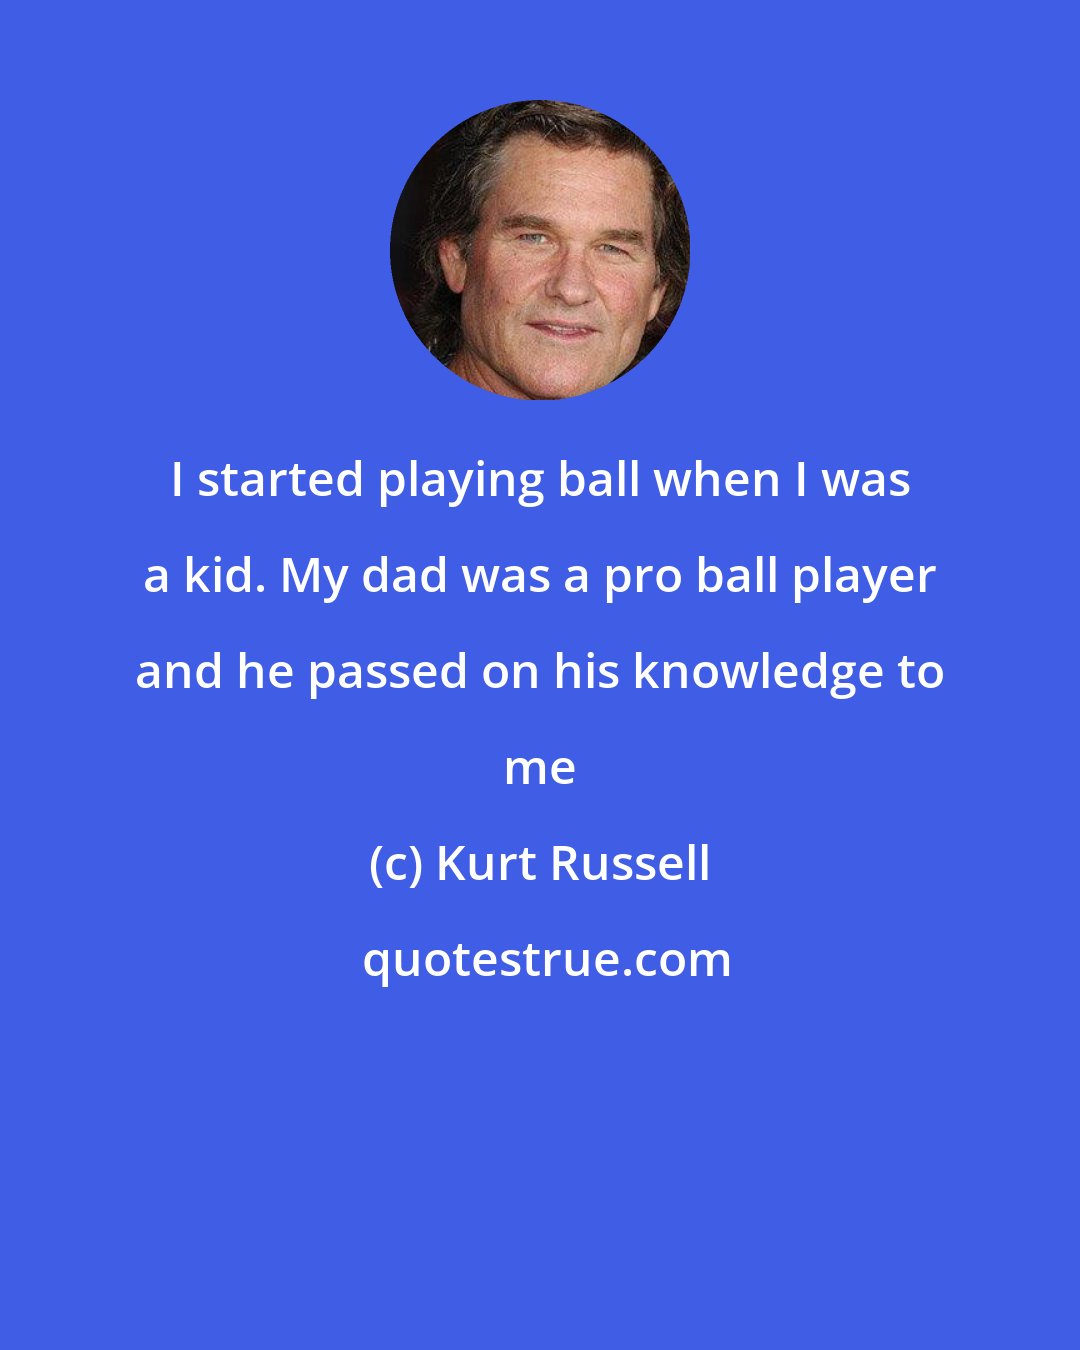 Kurt Russell: I started playing ball when I was a kid. My dad was a pro ball player and he passed on his knowledge to me